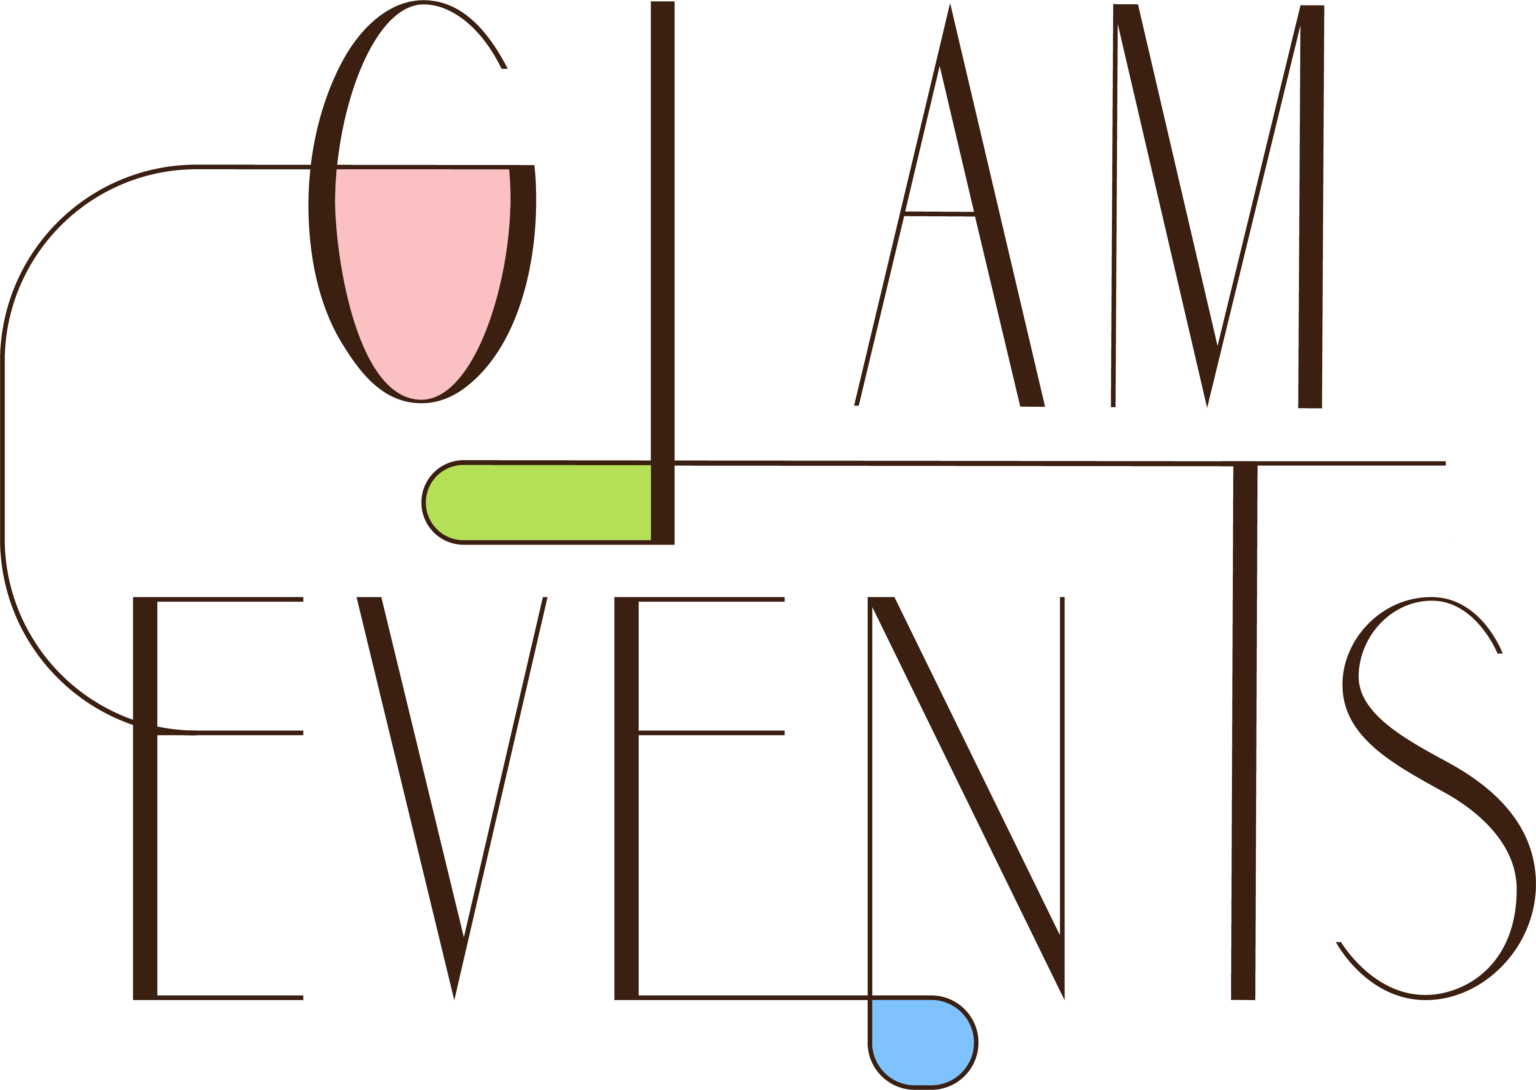 Quote Received - Glam Events